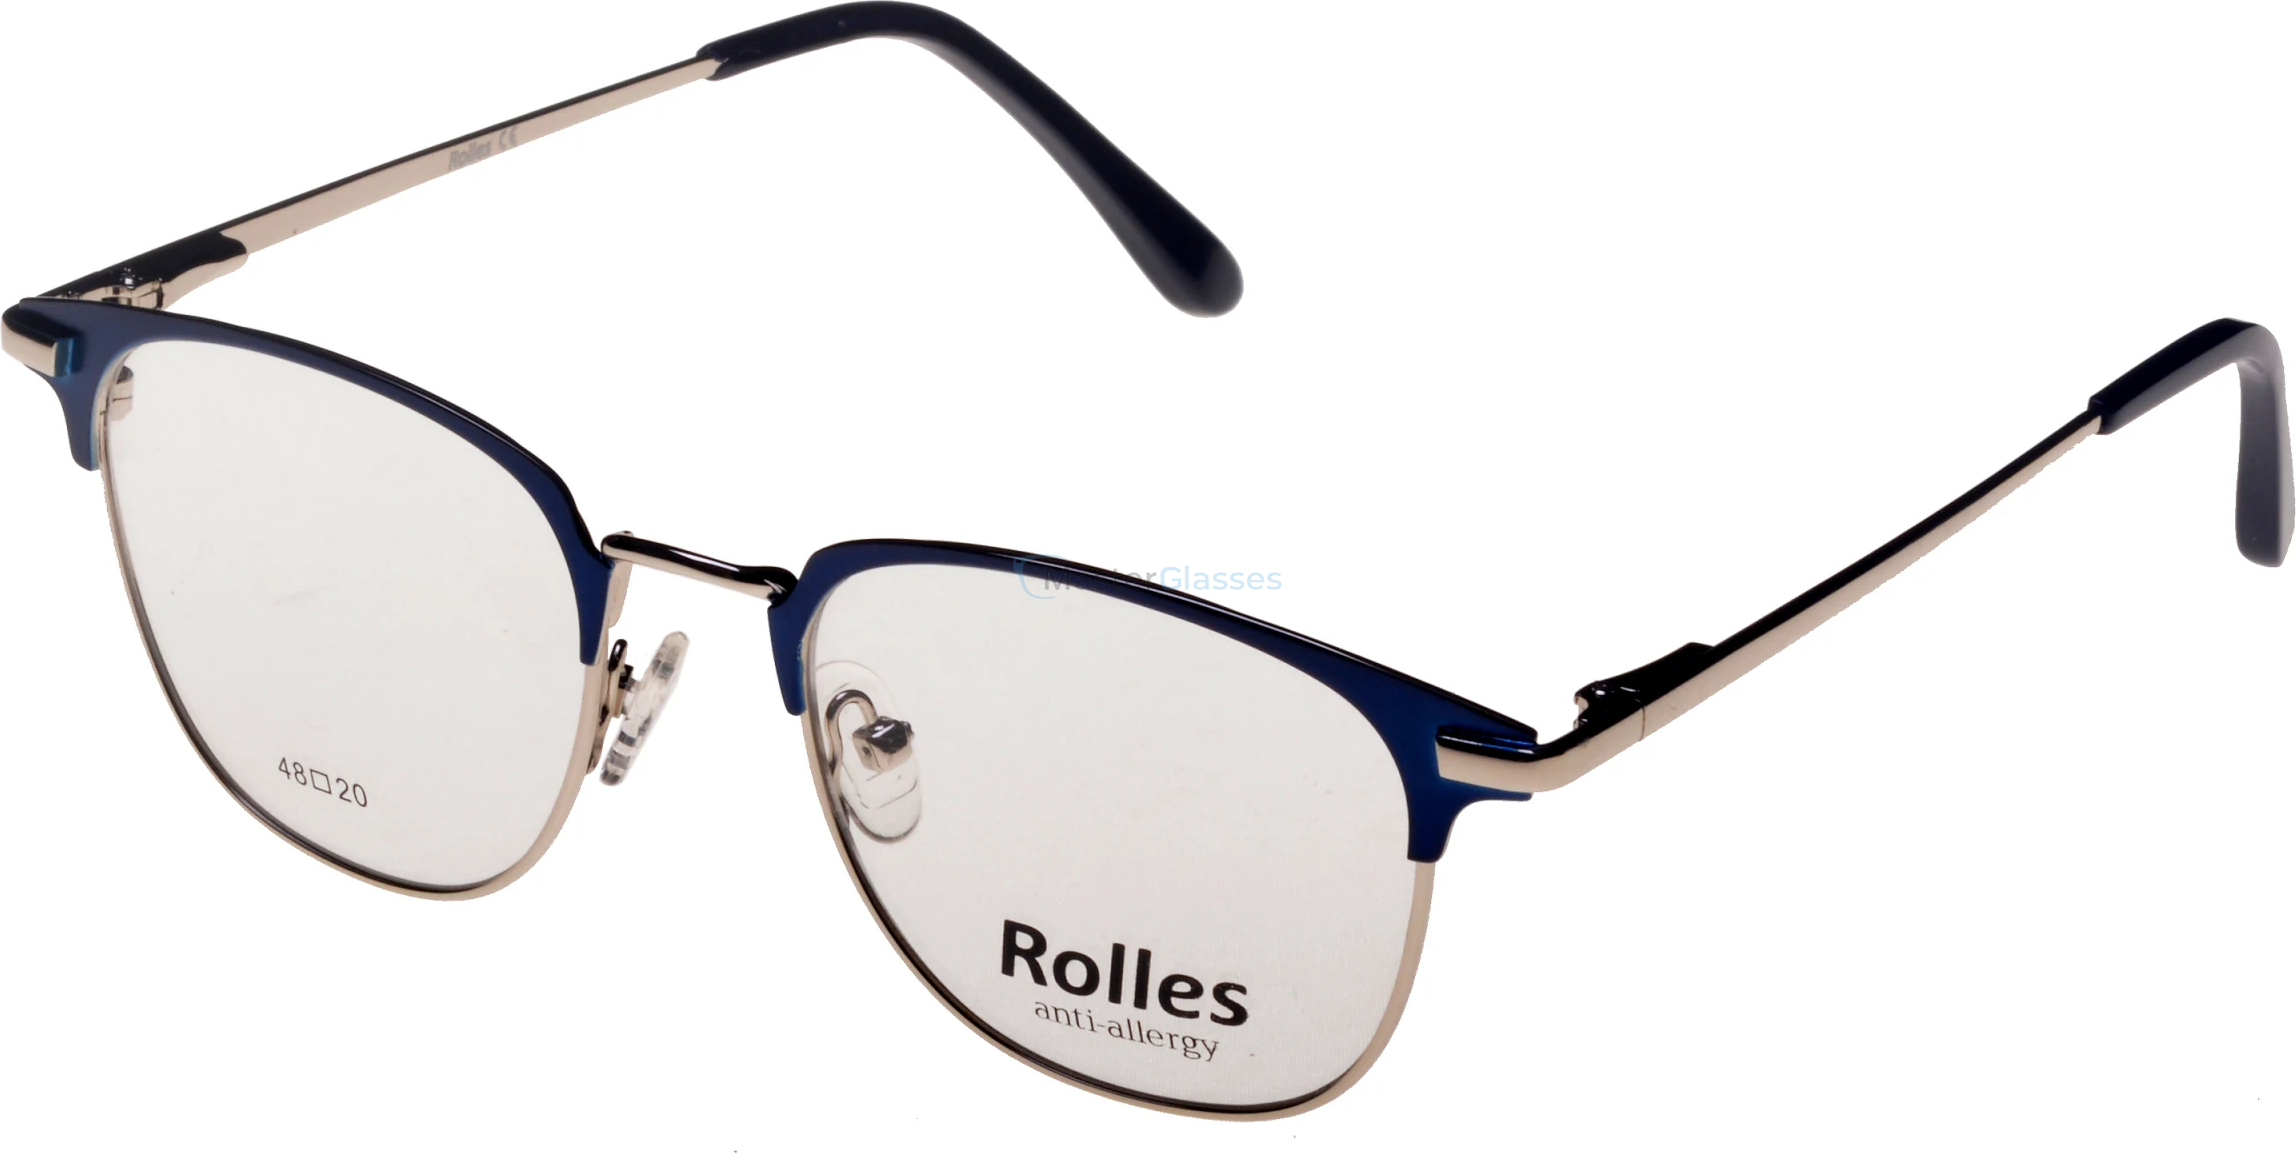  Rolles 712 02